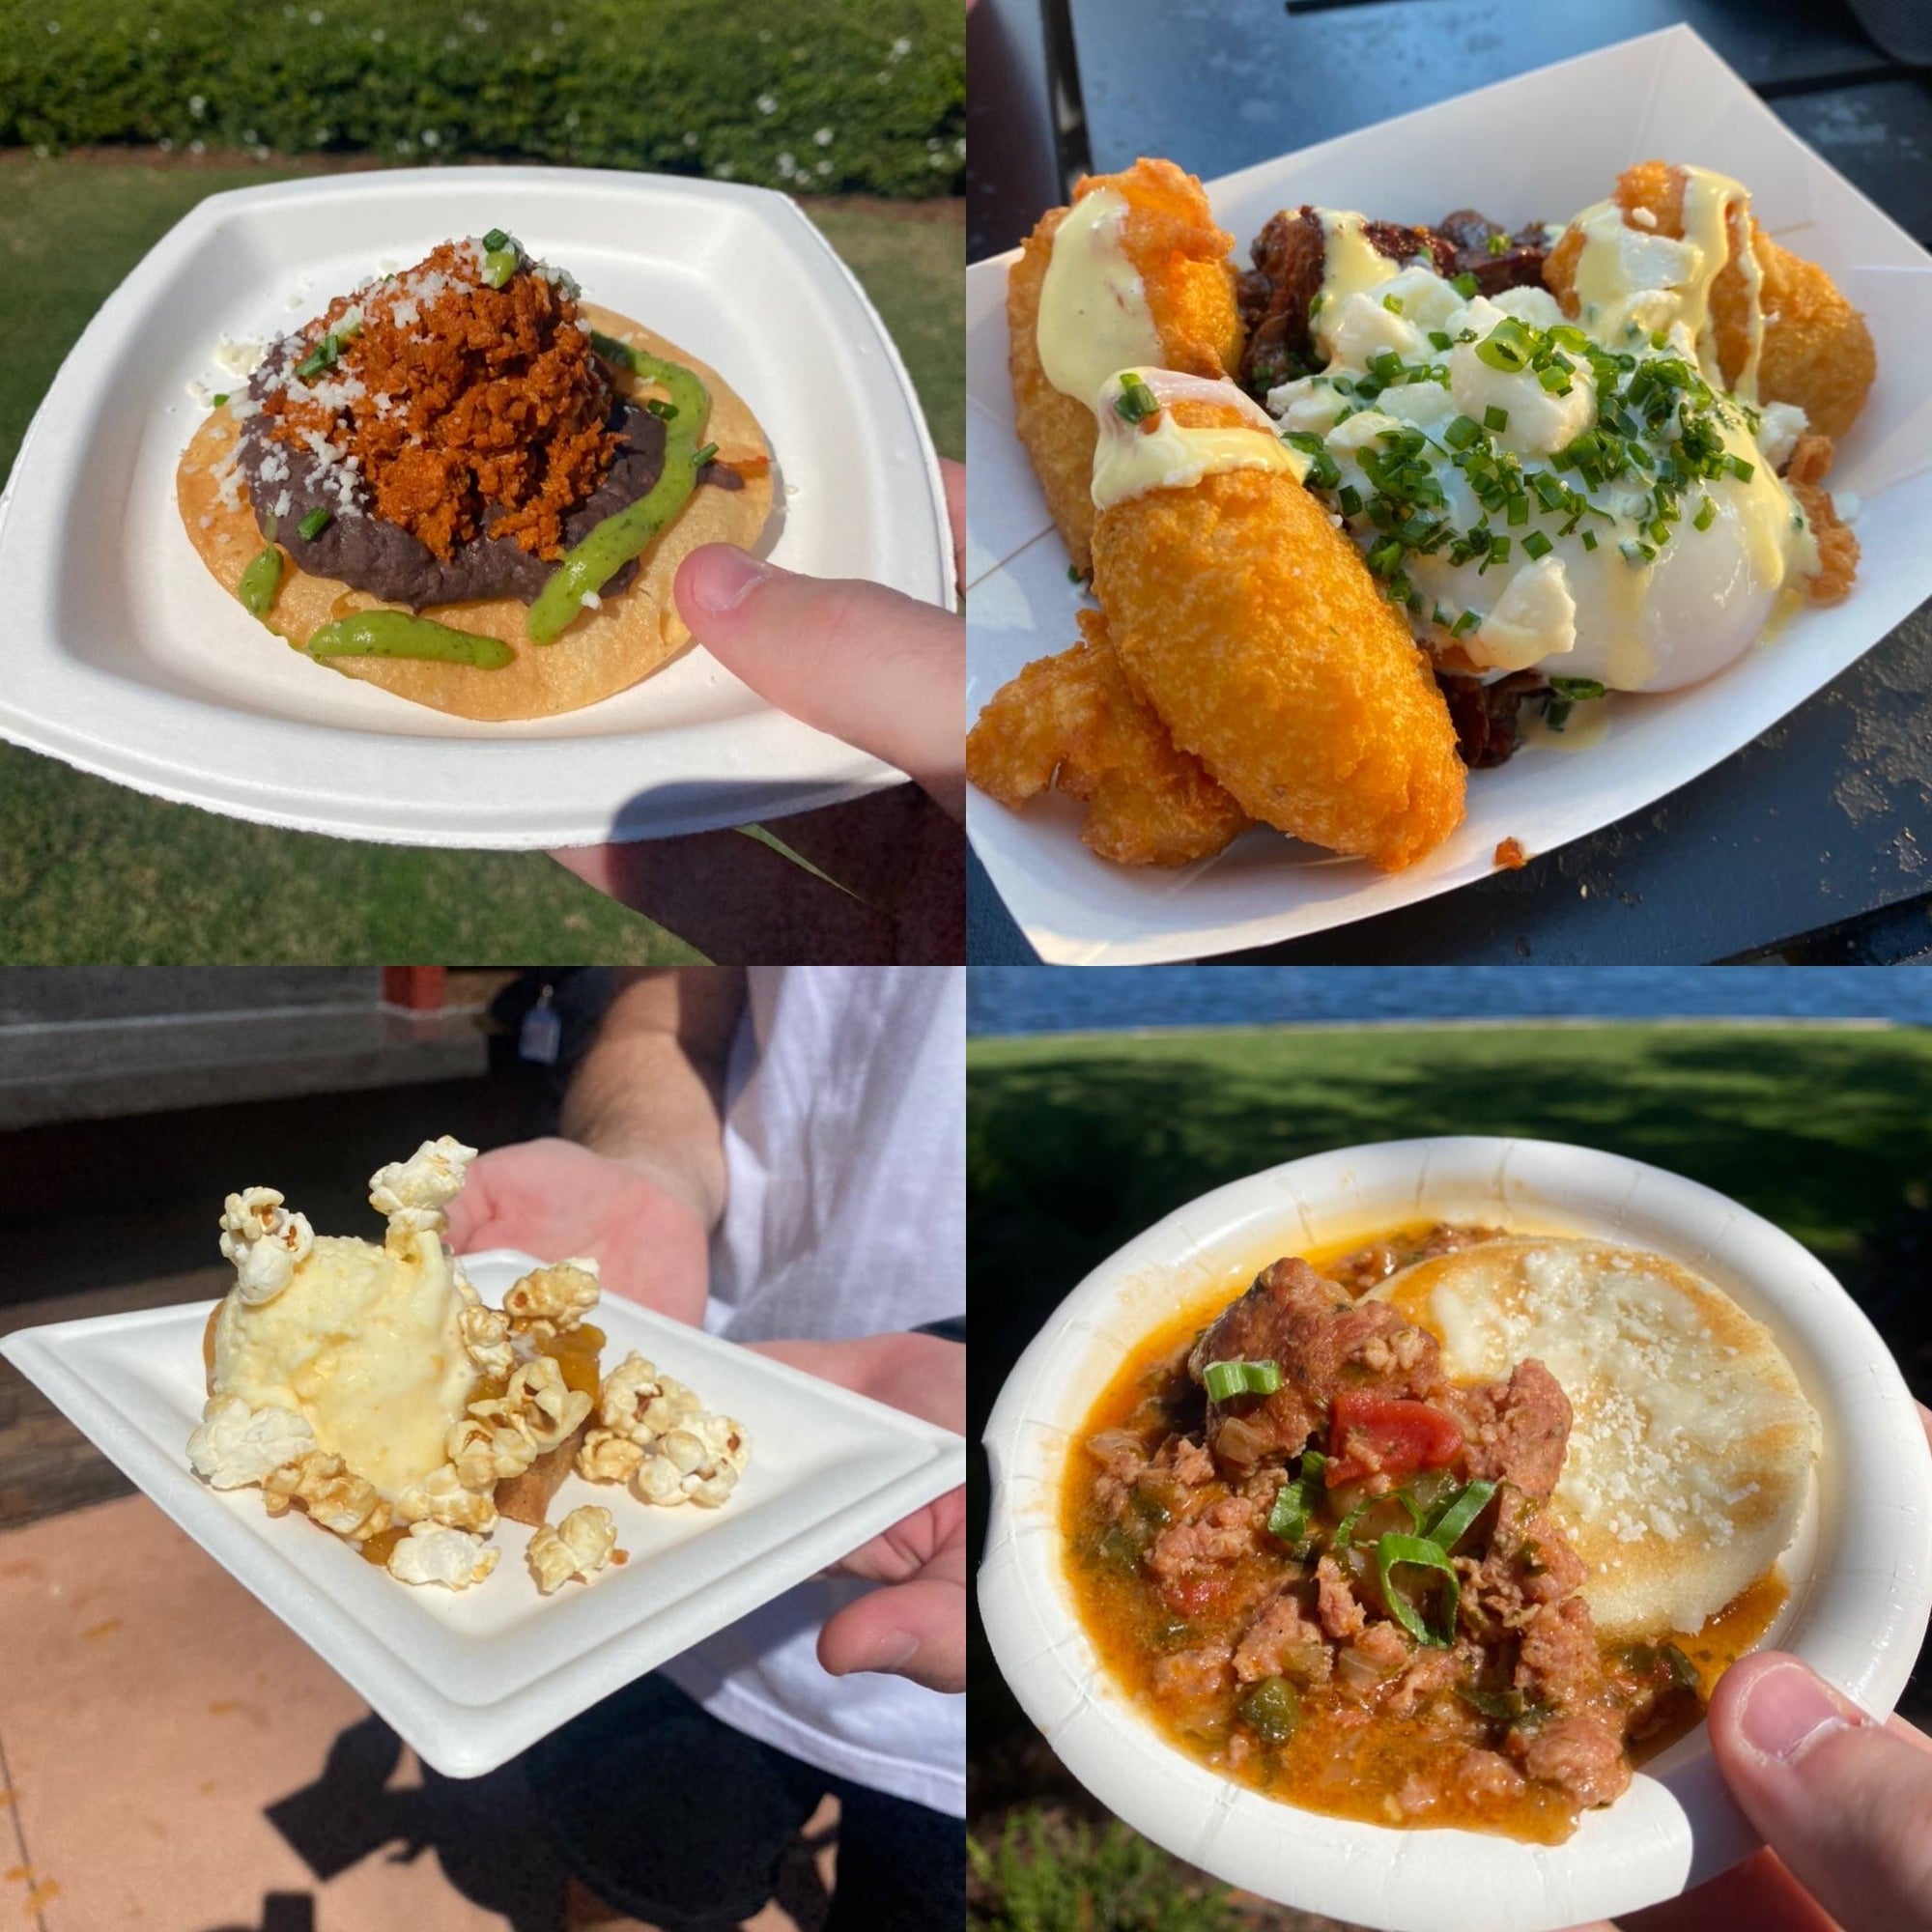 Here’s Every New Food Item We Tried at the 2022 EPCOT Flower and Garden Festival!